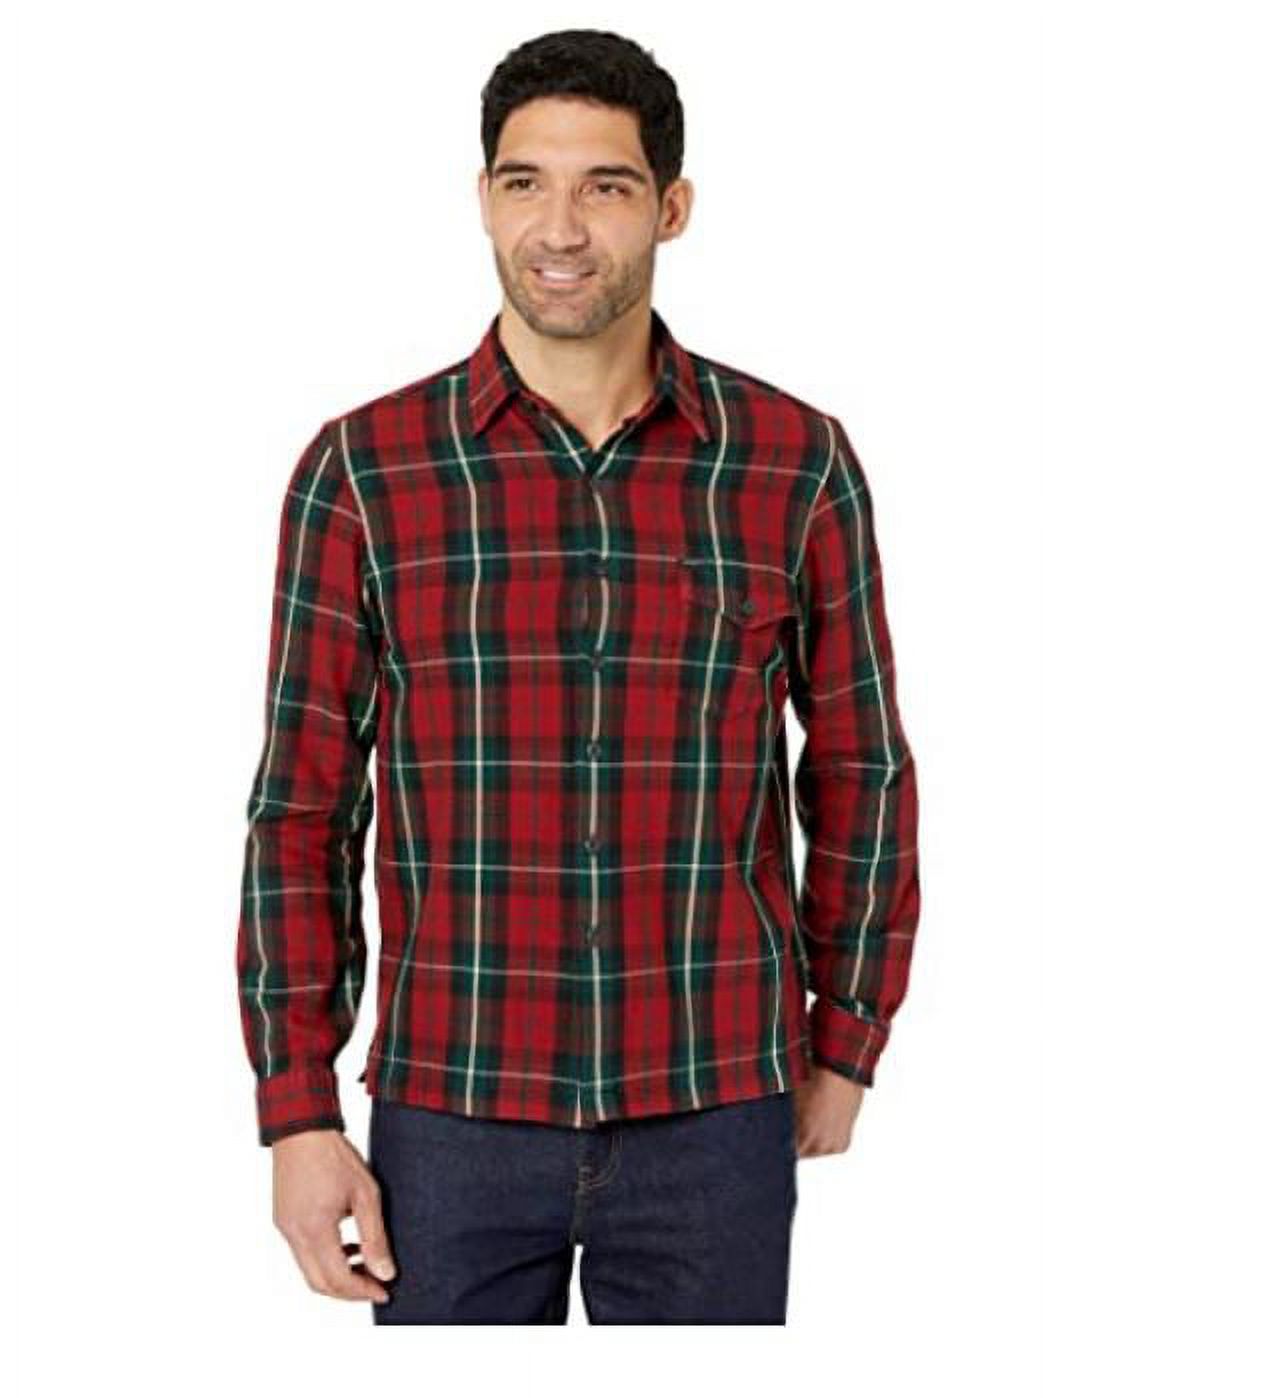 Polo Ralph Lauren Men's Red Classic Fit Plaid Twill Shirt, Large - image 1 of 6